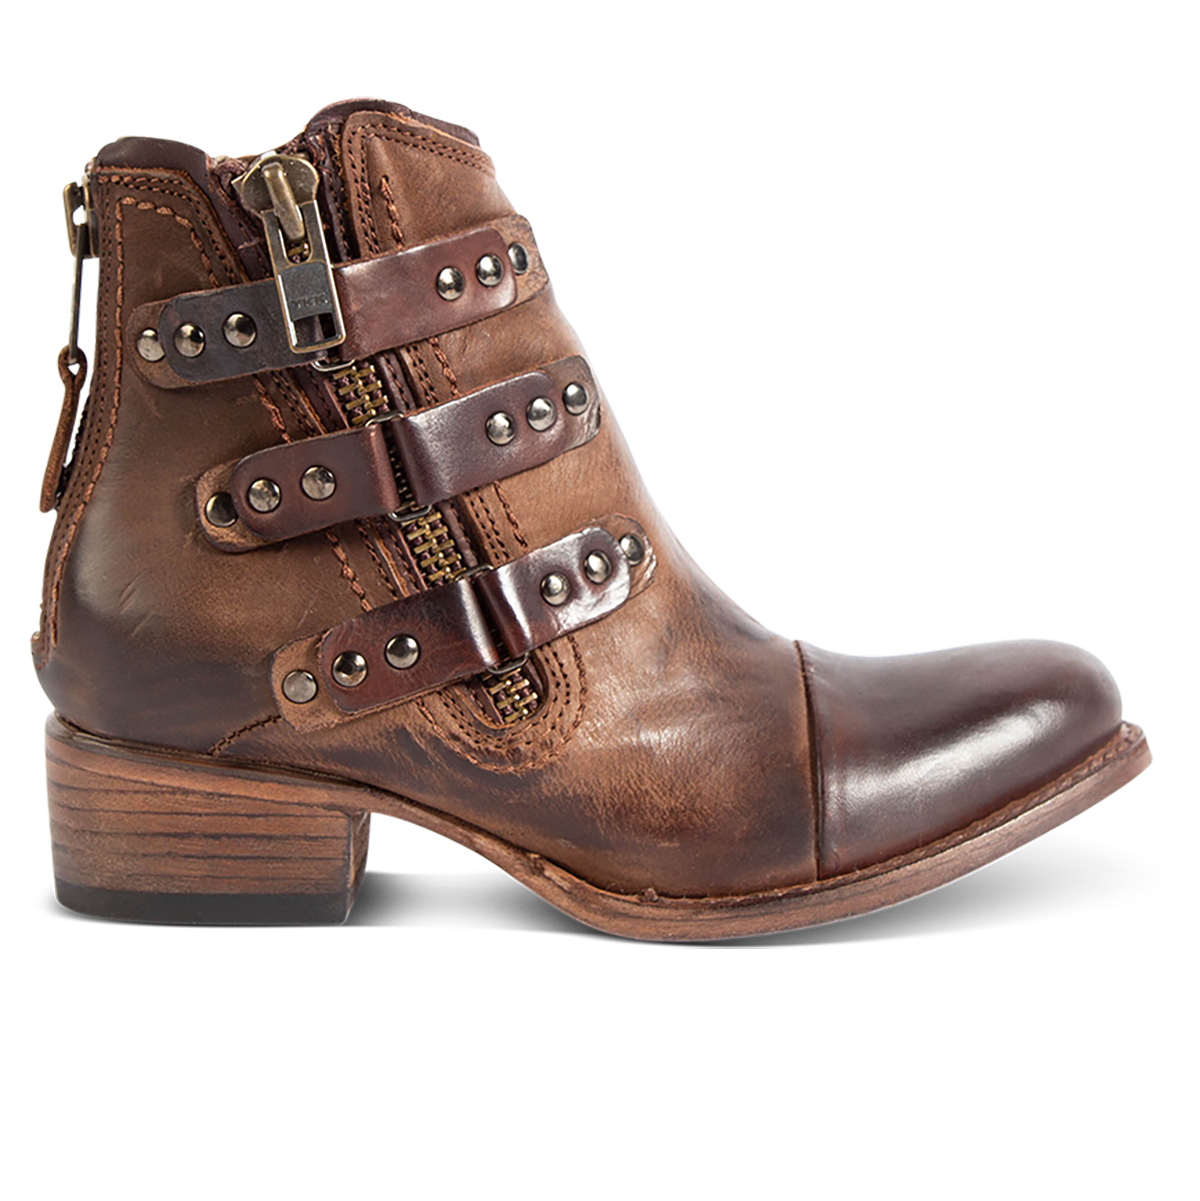 FREEBIRD women's Grecko brown leather ankle bootie with low block heel and symmetrical studded straps.